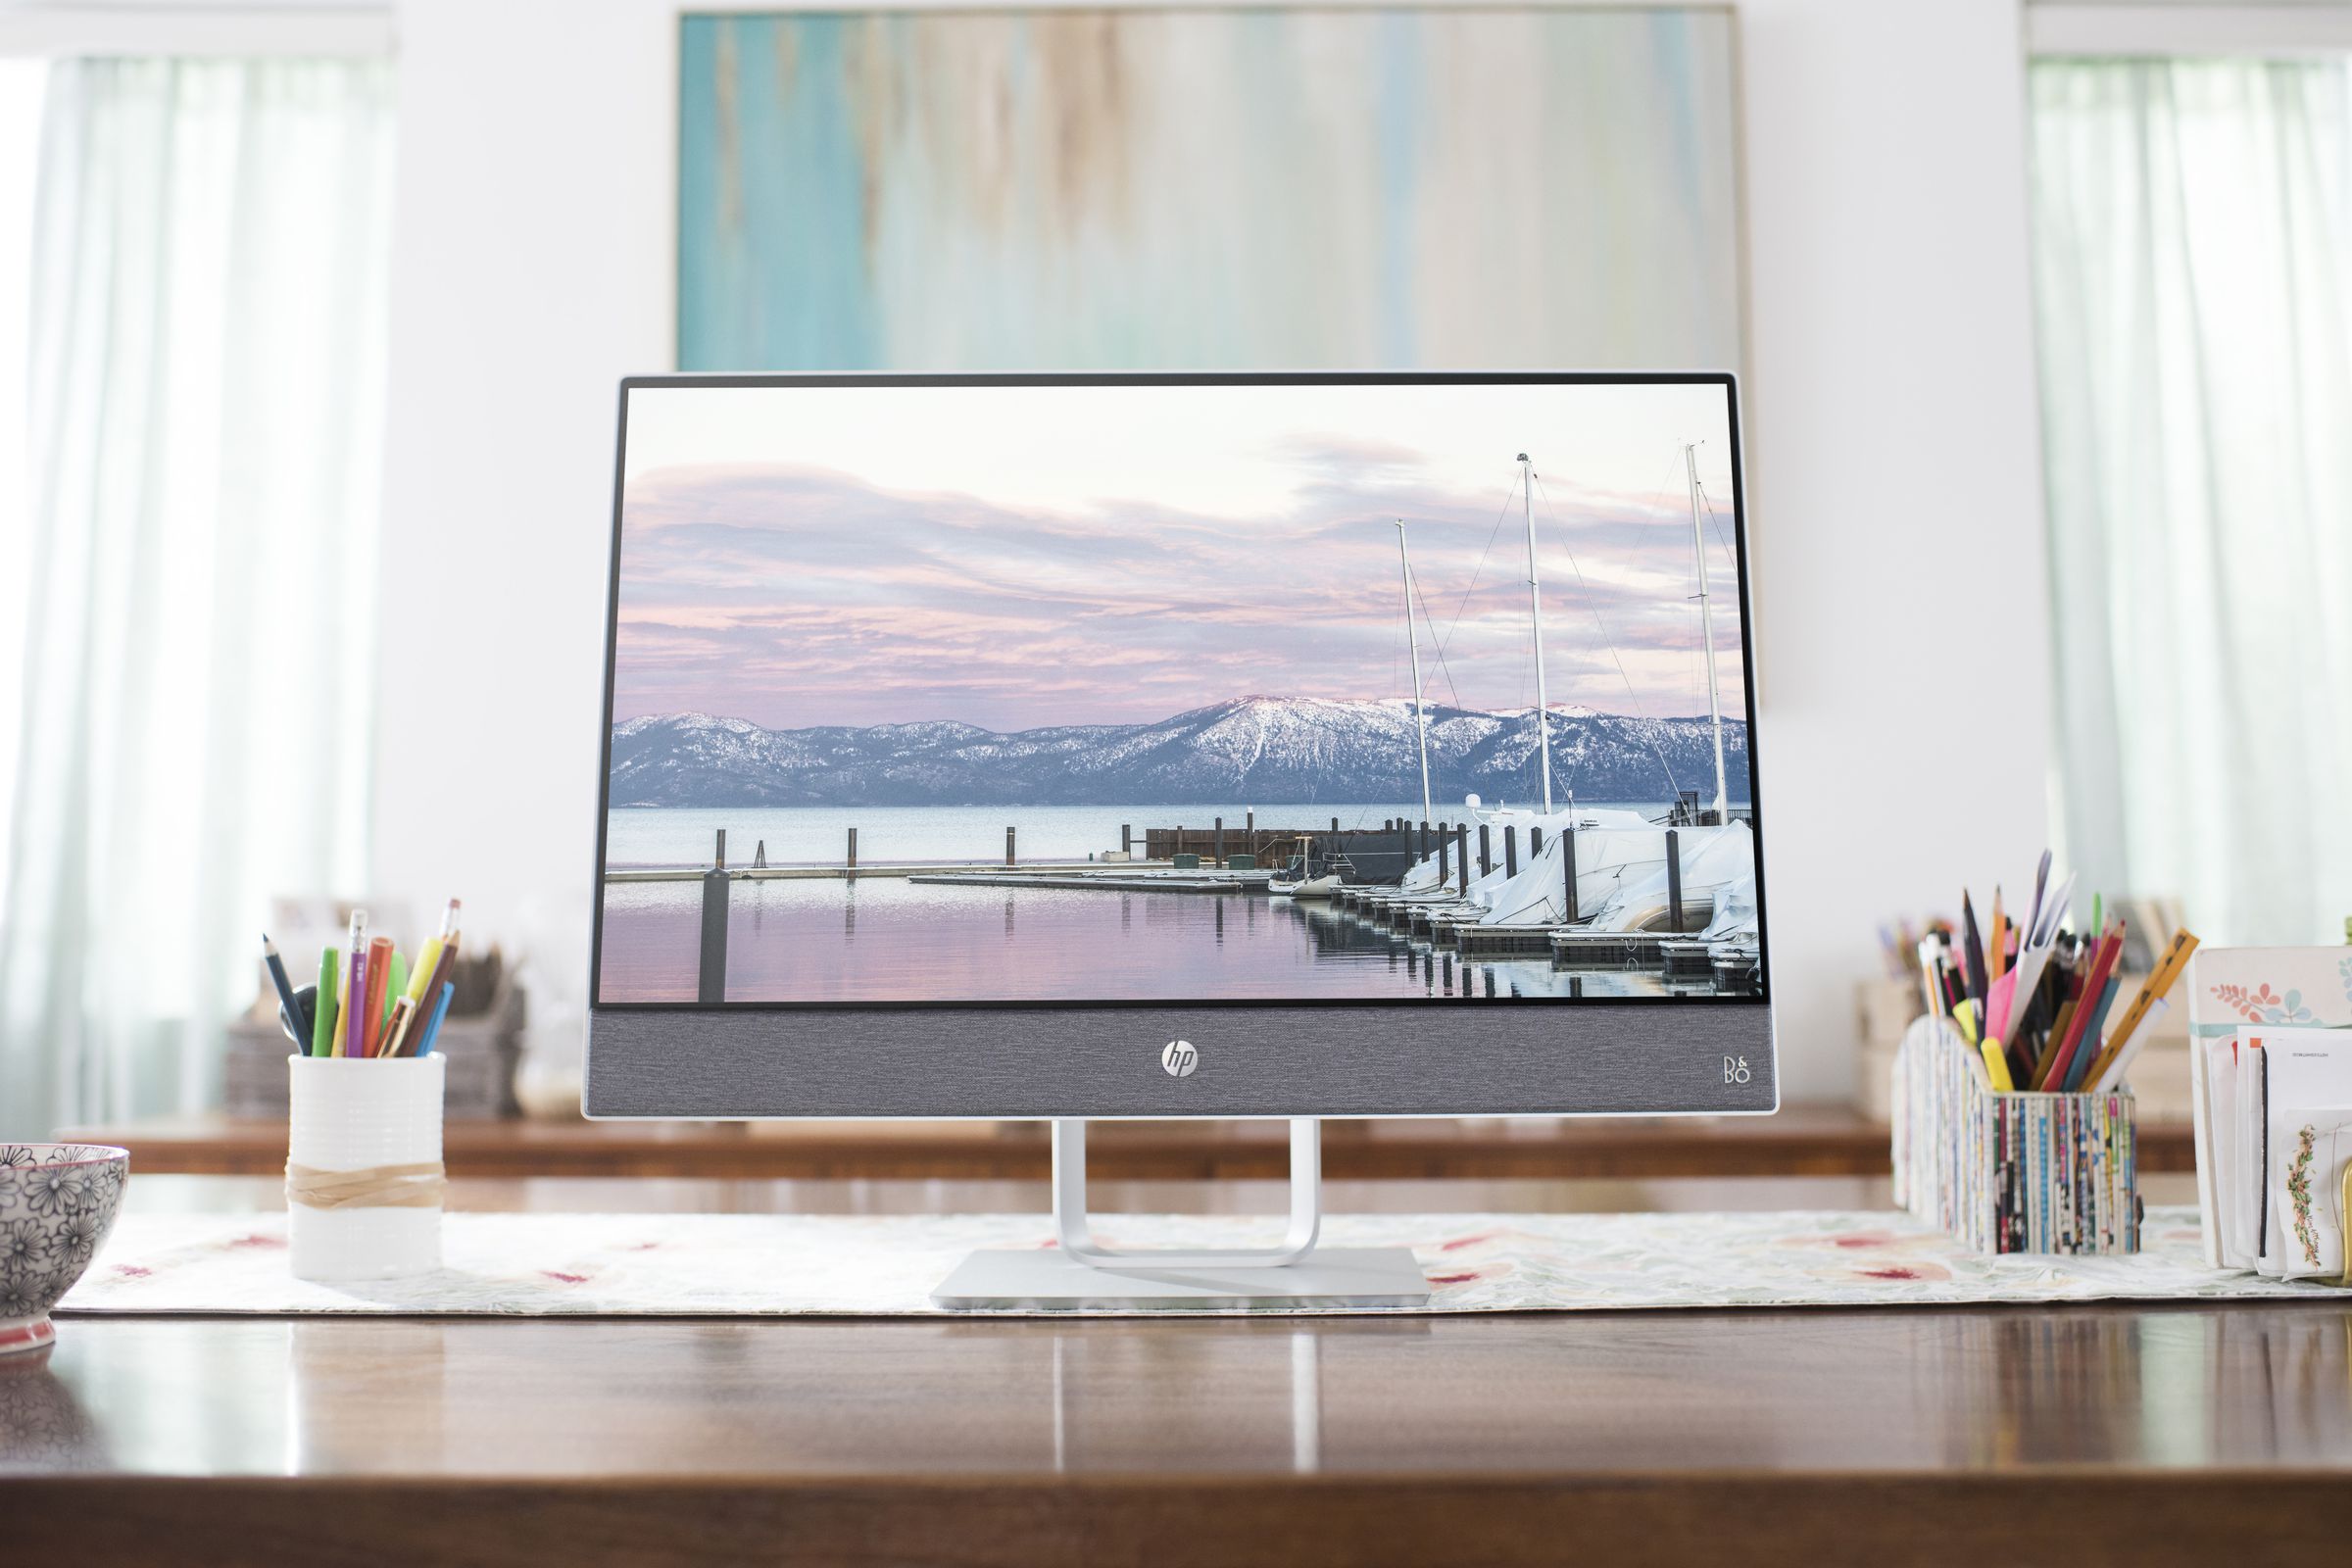 The revamped HP Pavillion All-In-One